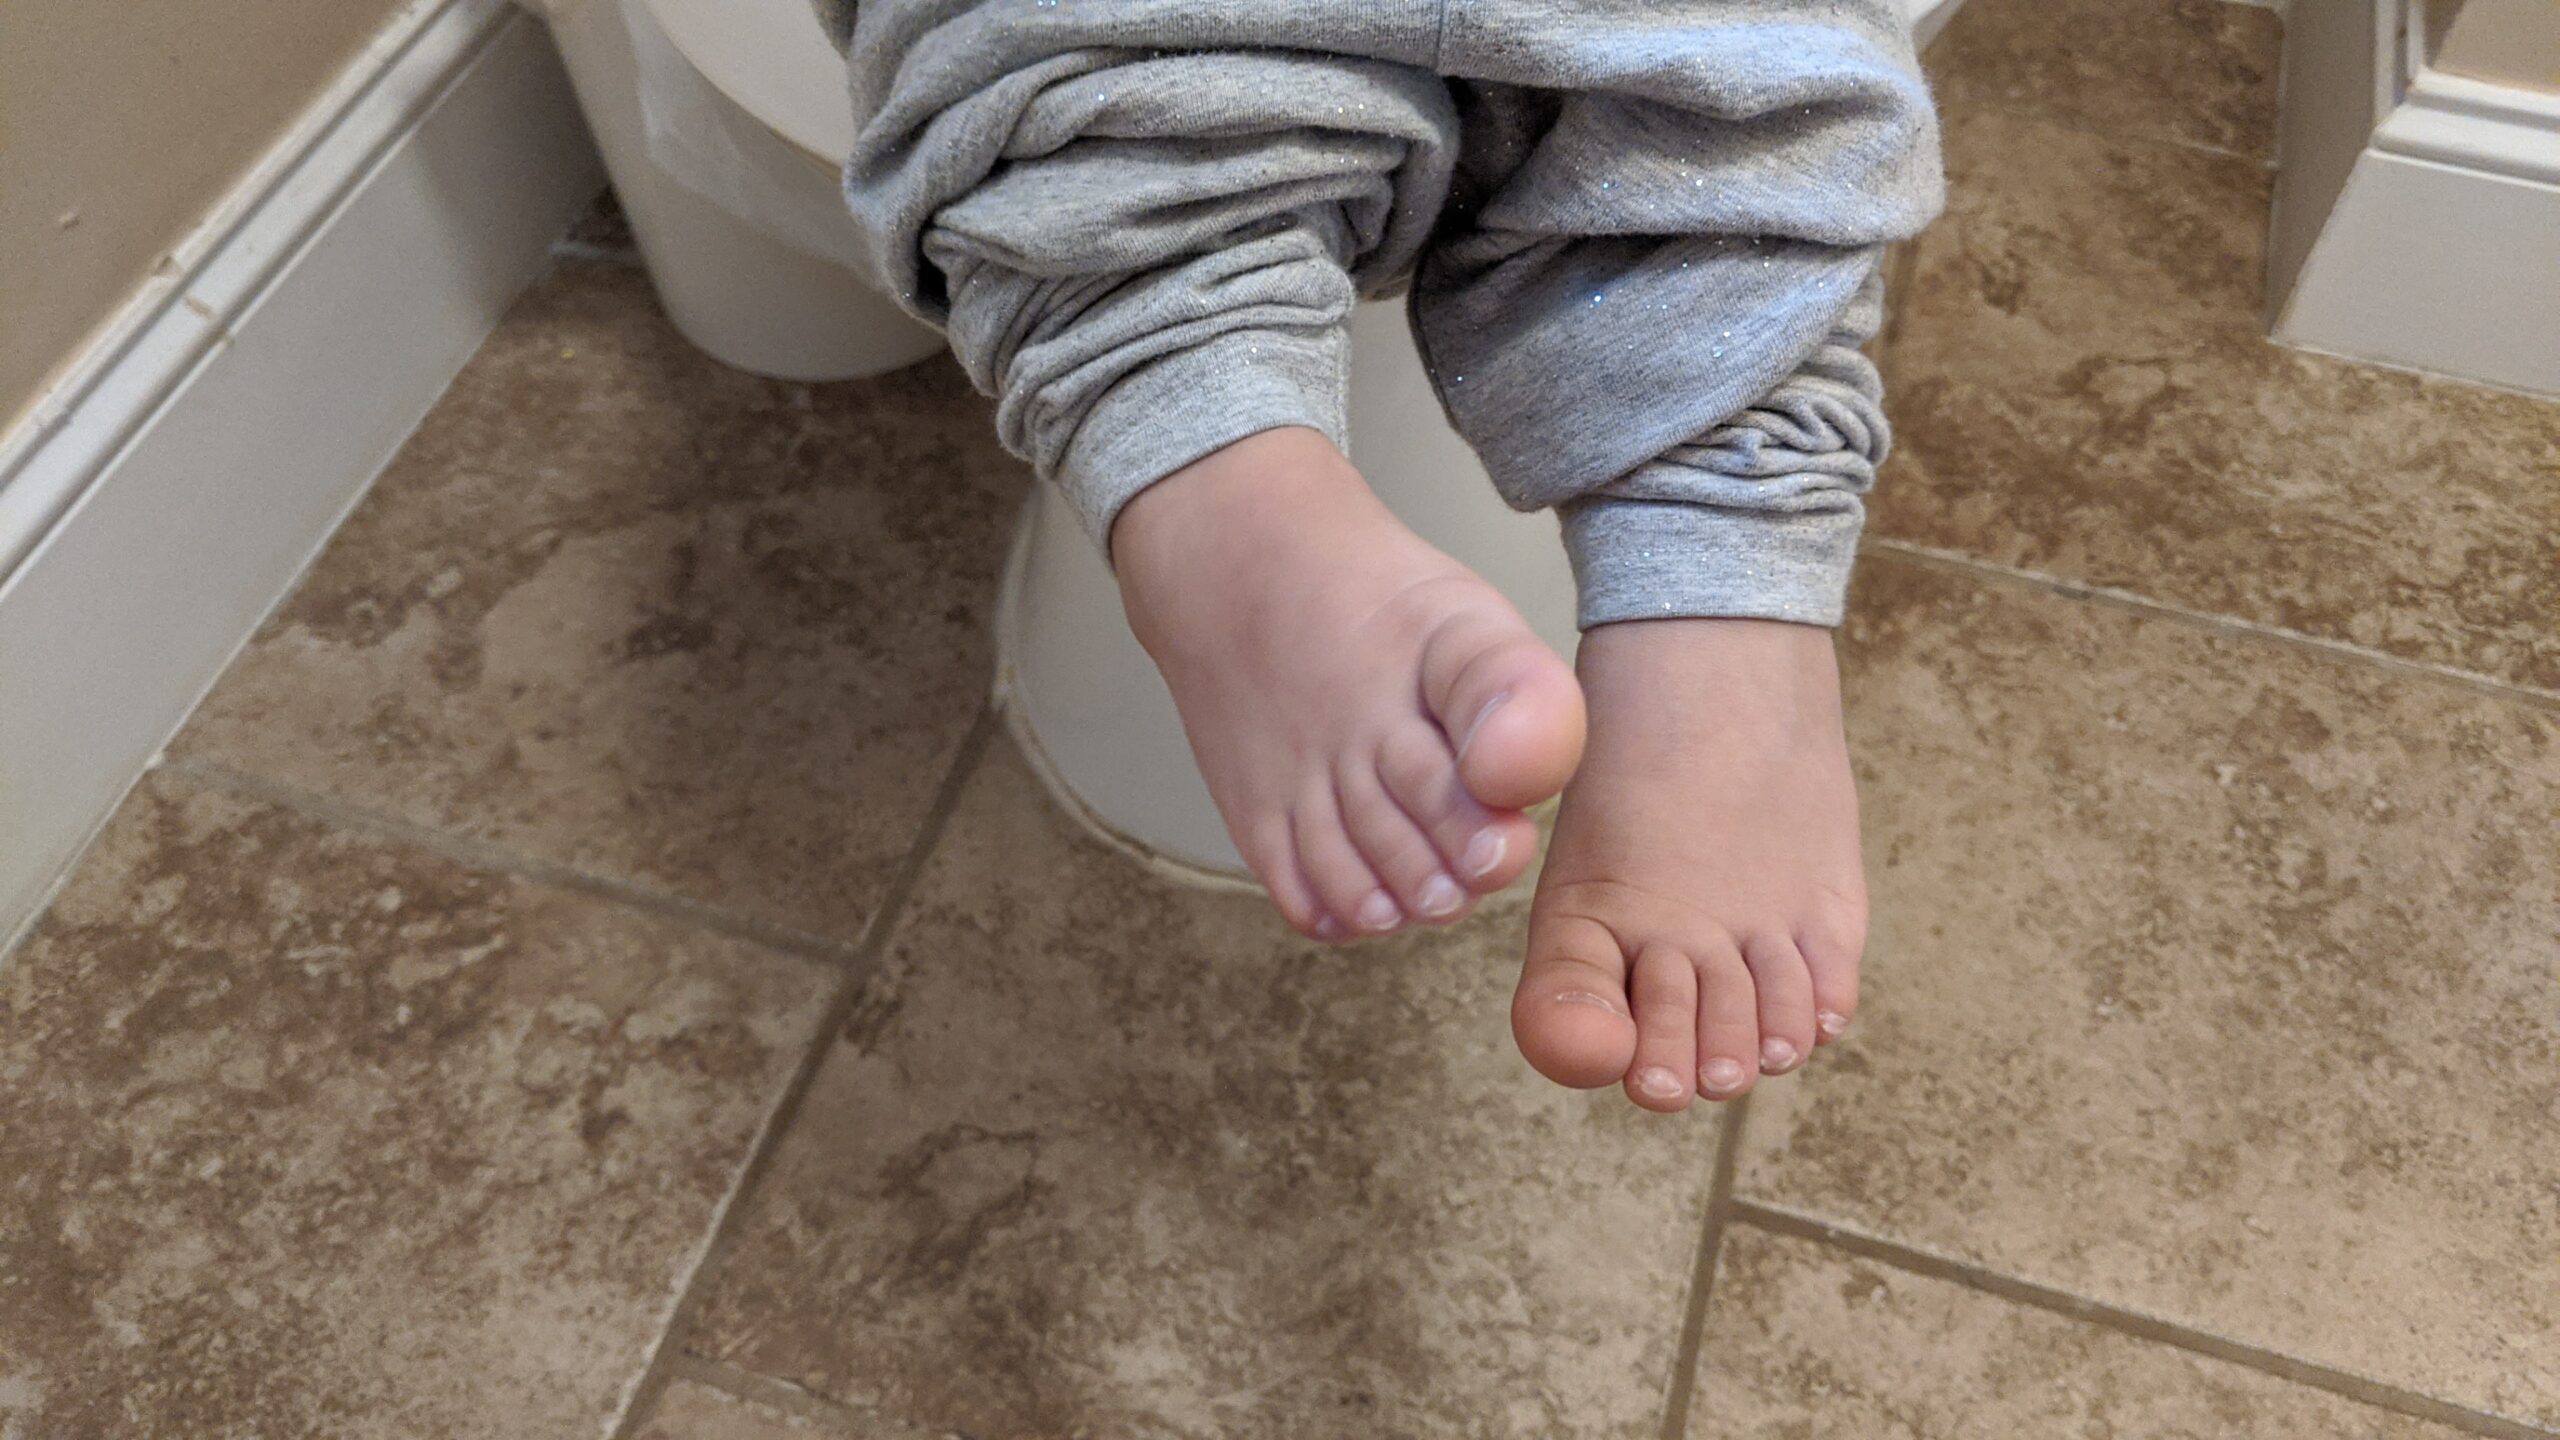 Mama RIssa's daughter's feet hanging over the potty while potty training.